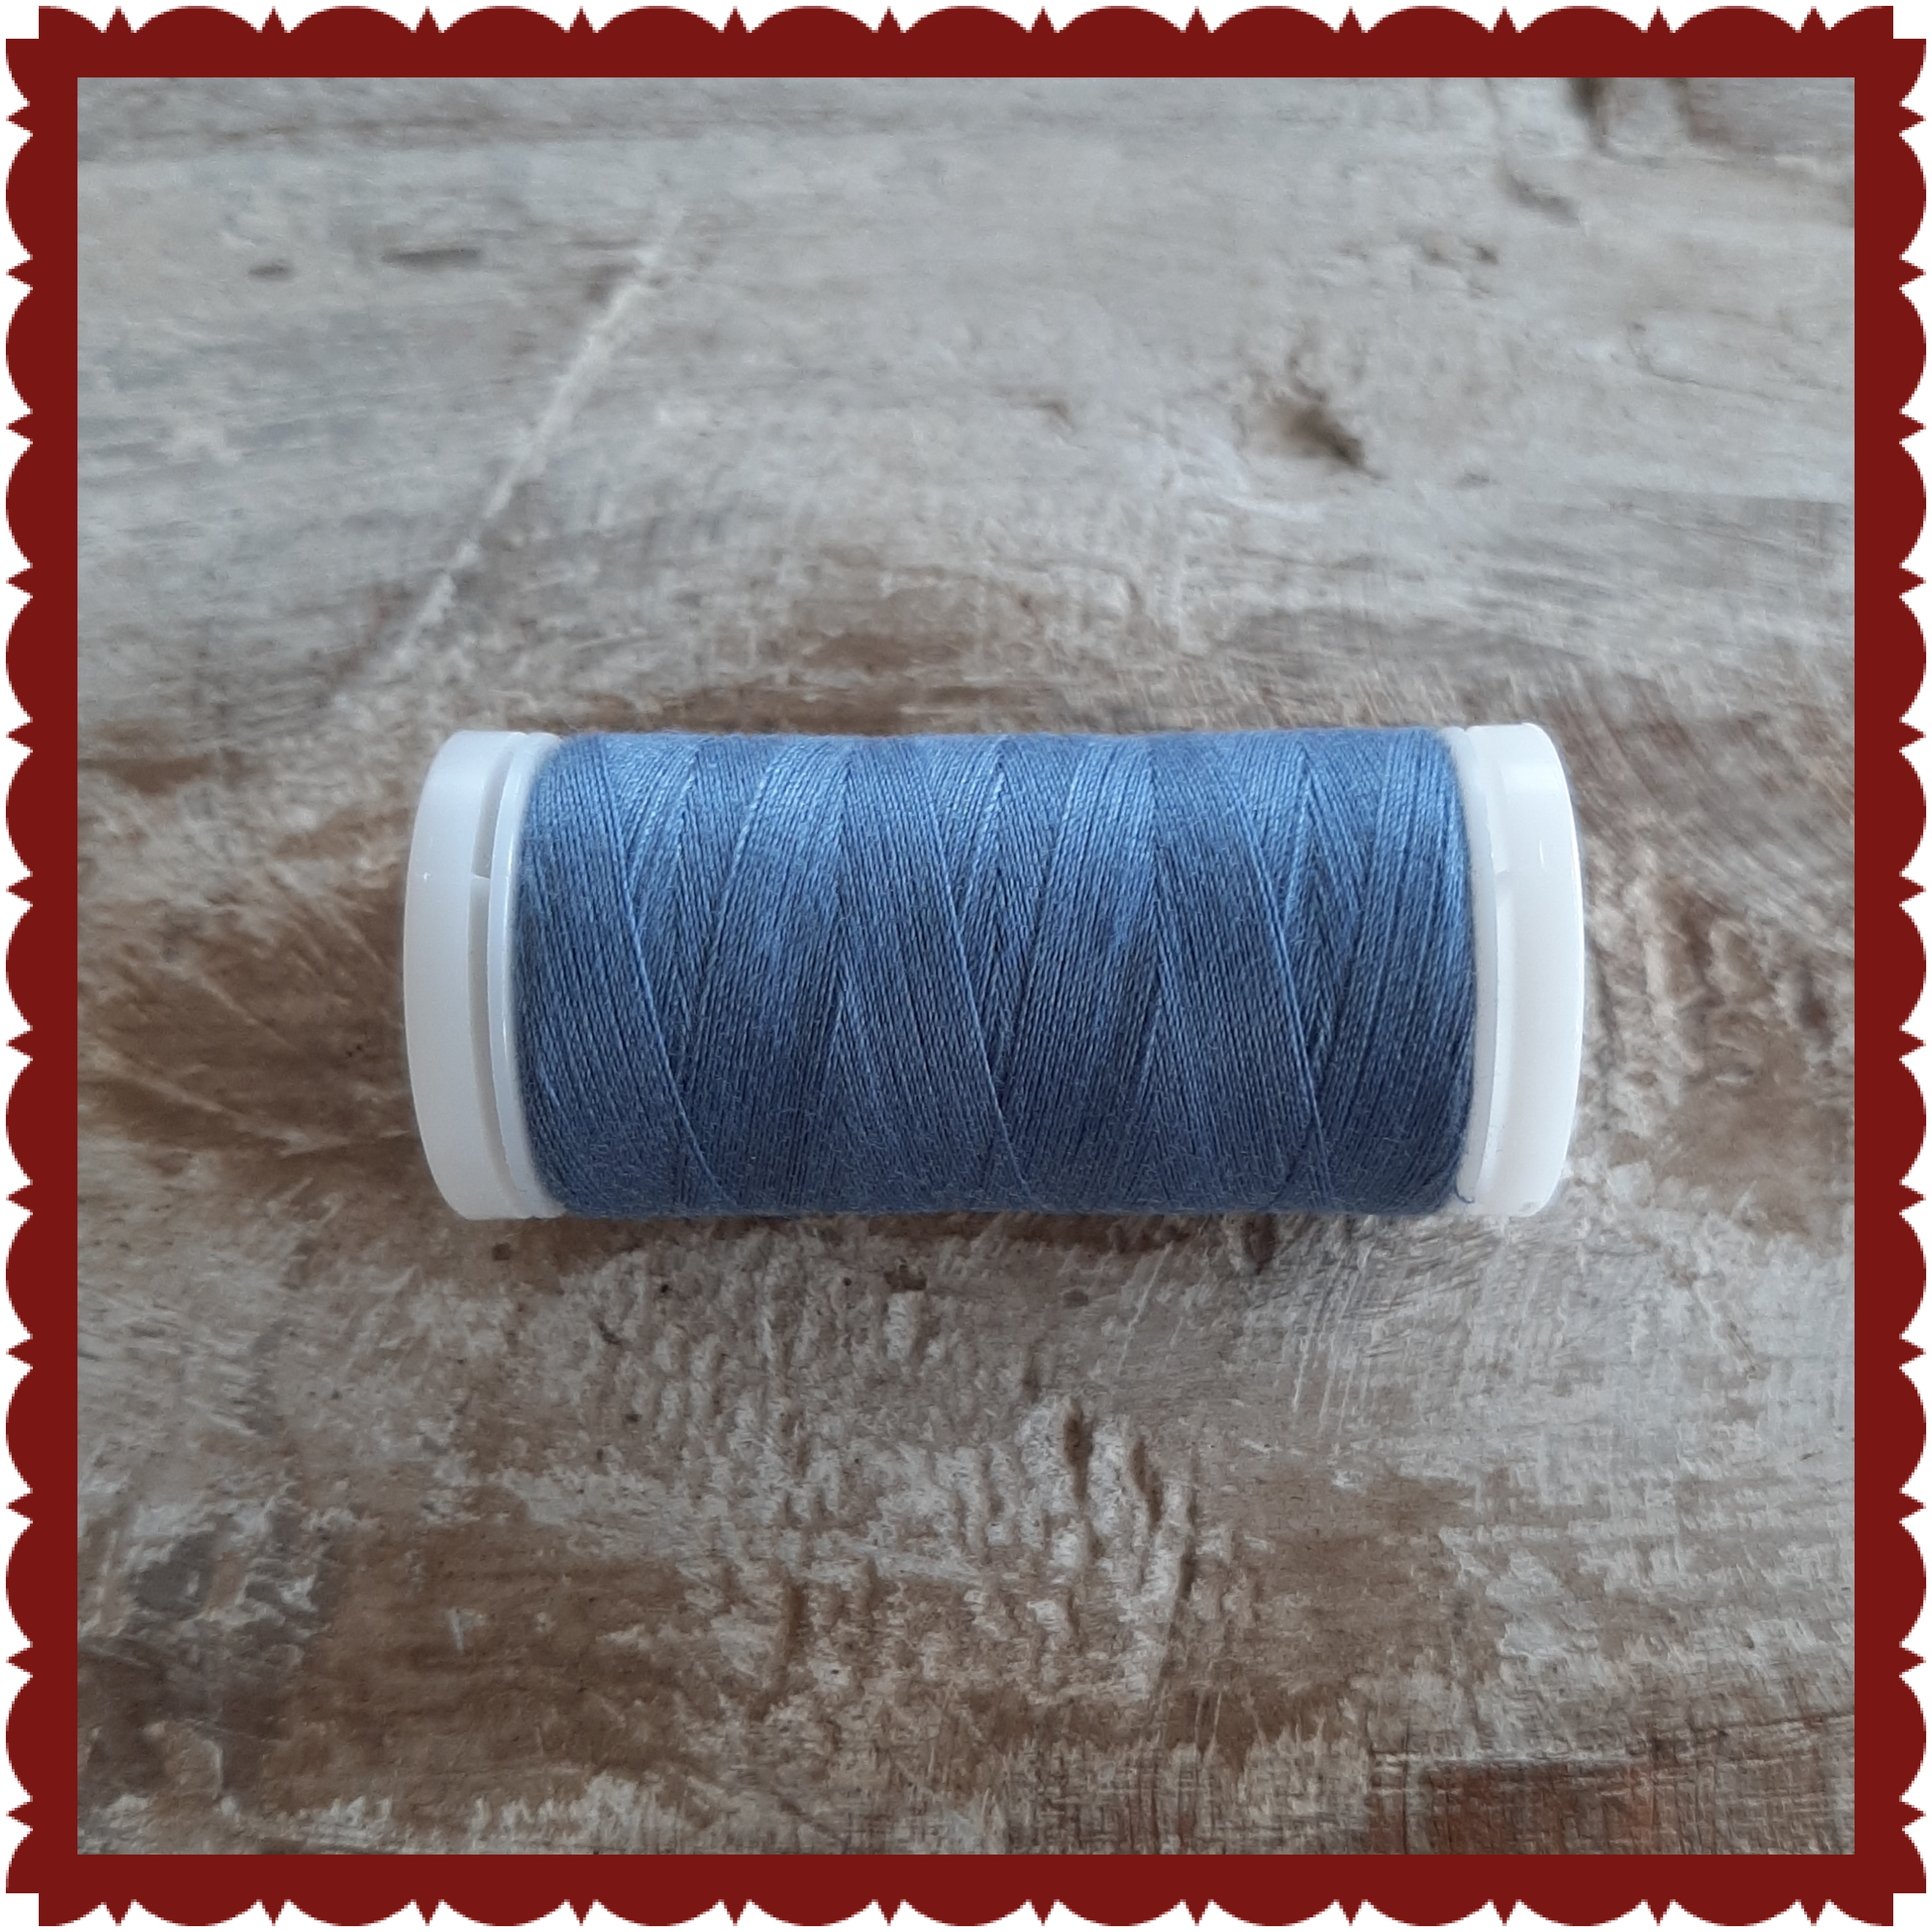 Sewing thread red, blue or white